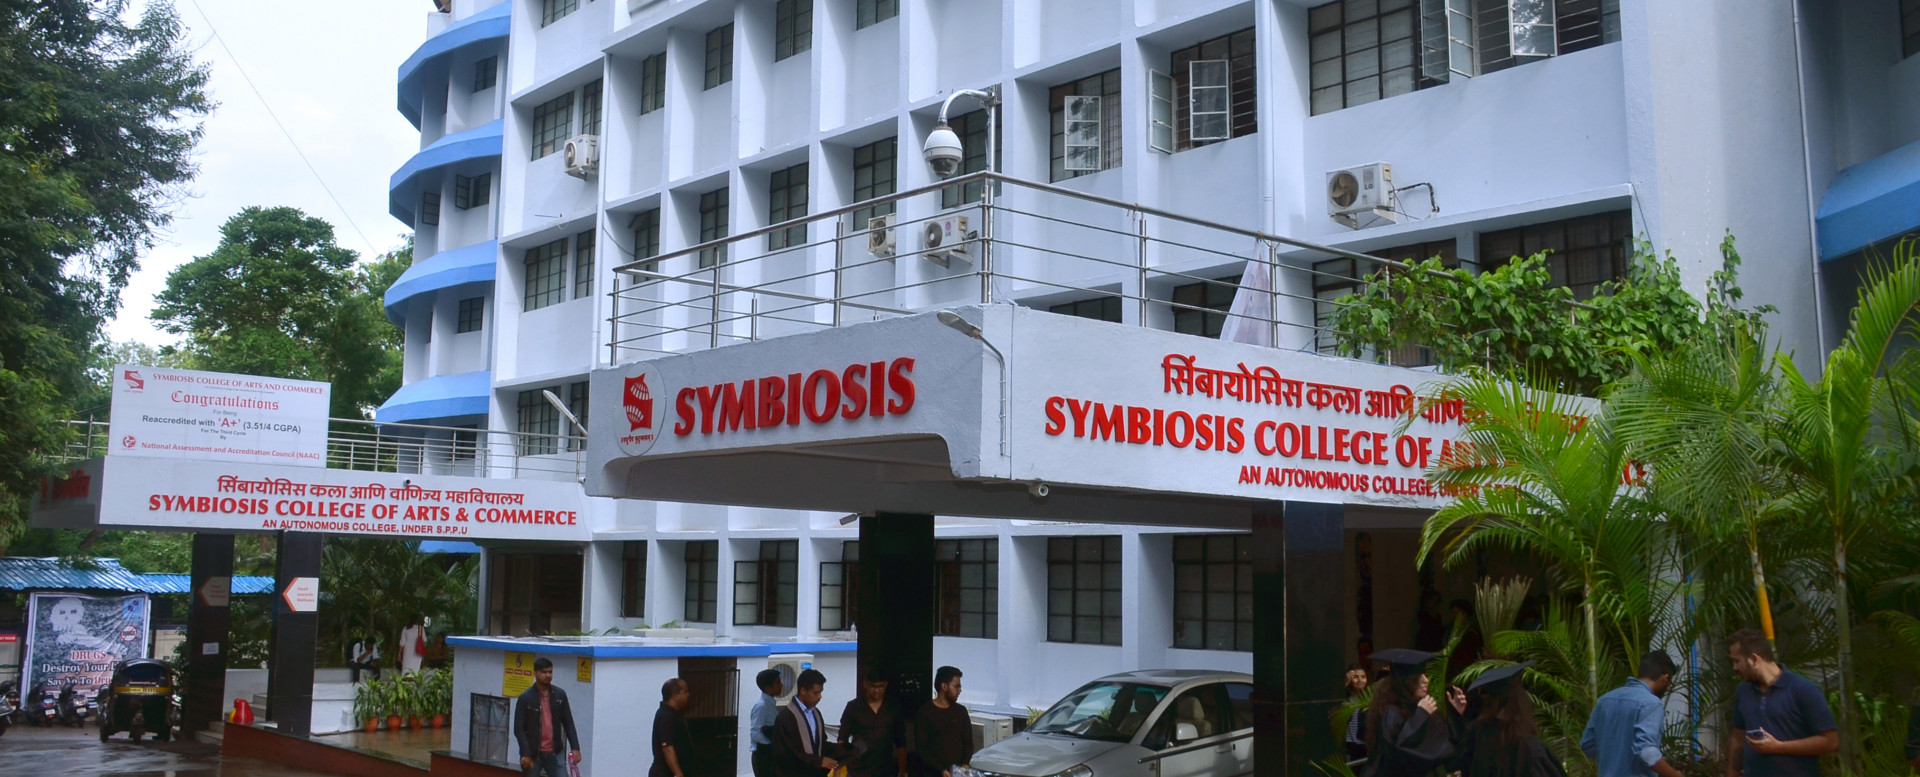 Symbiosis College of Arts and Commerce, Pune Image